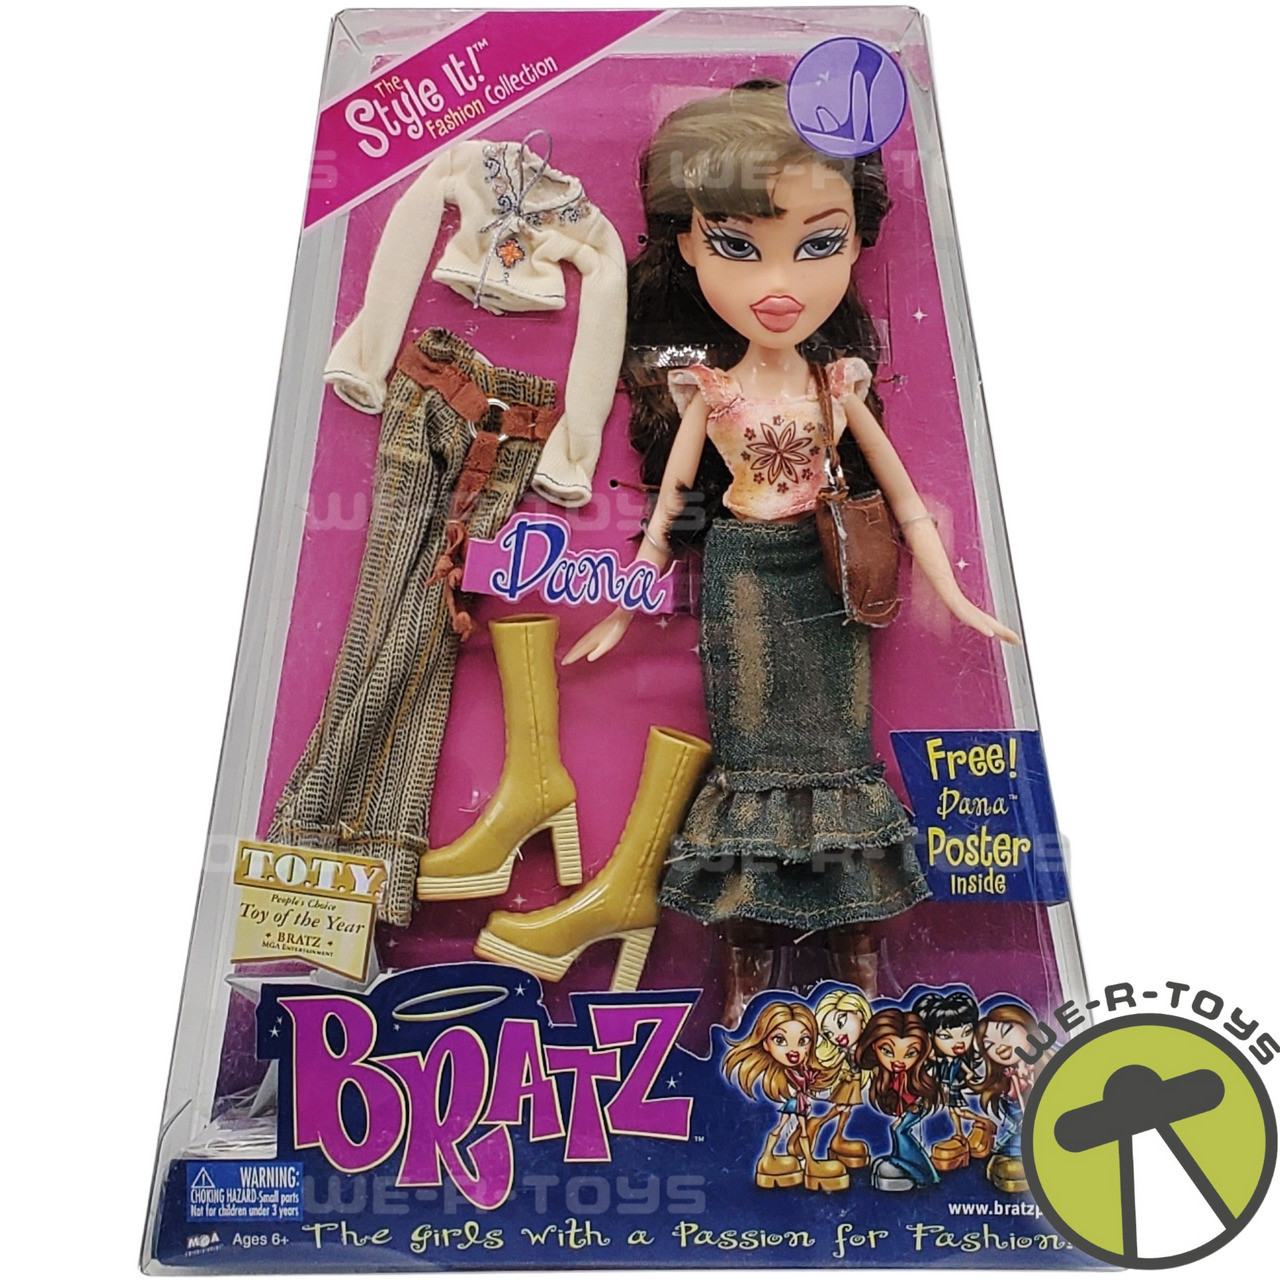 Bratz Dana Style It! Fashion Collection Doll with Poster 2003 MGA #258315  NRFB - We-R-Toys